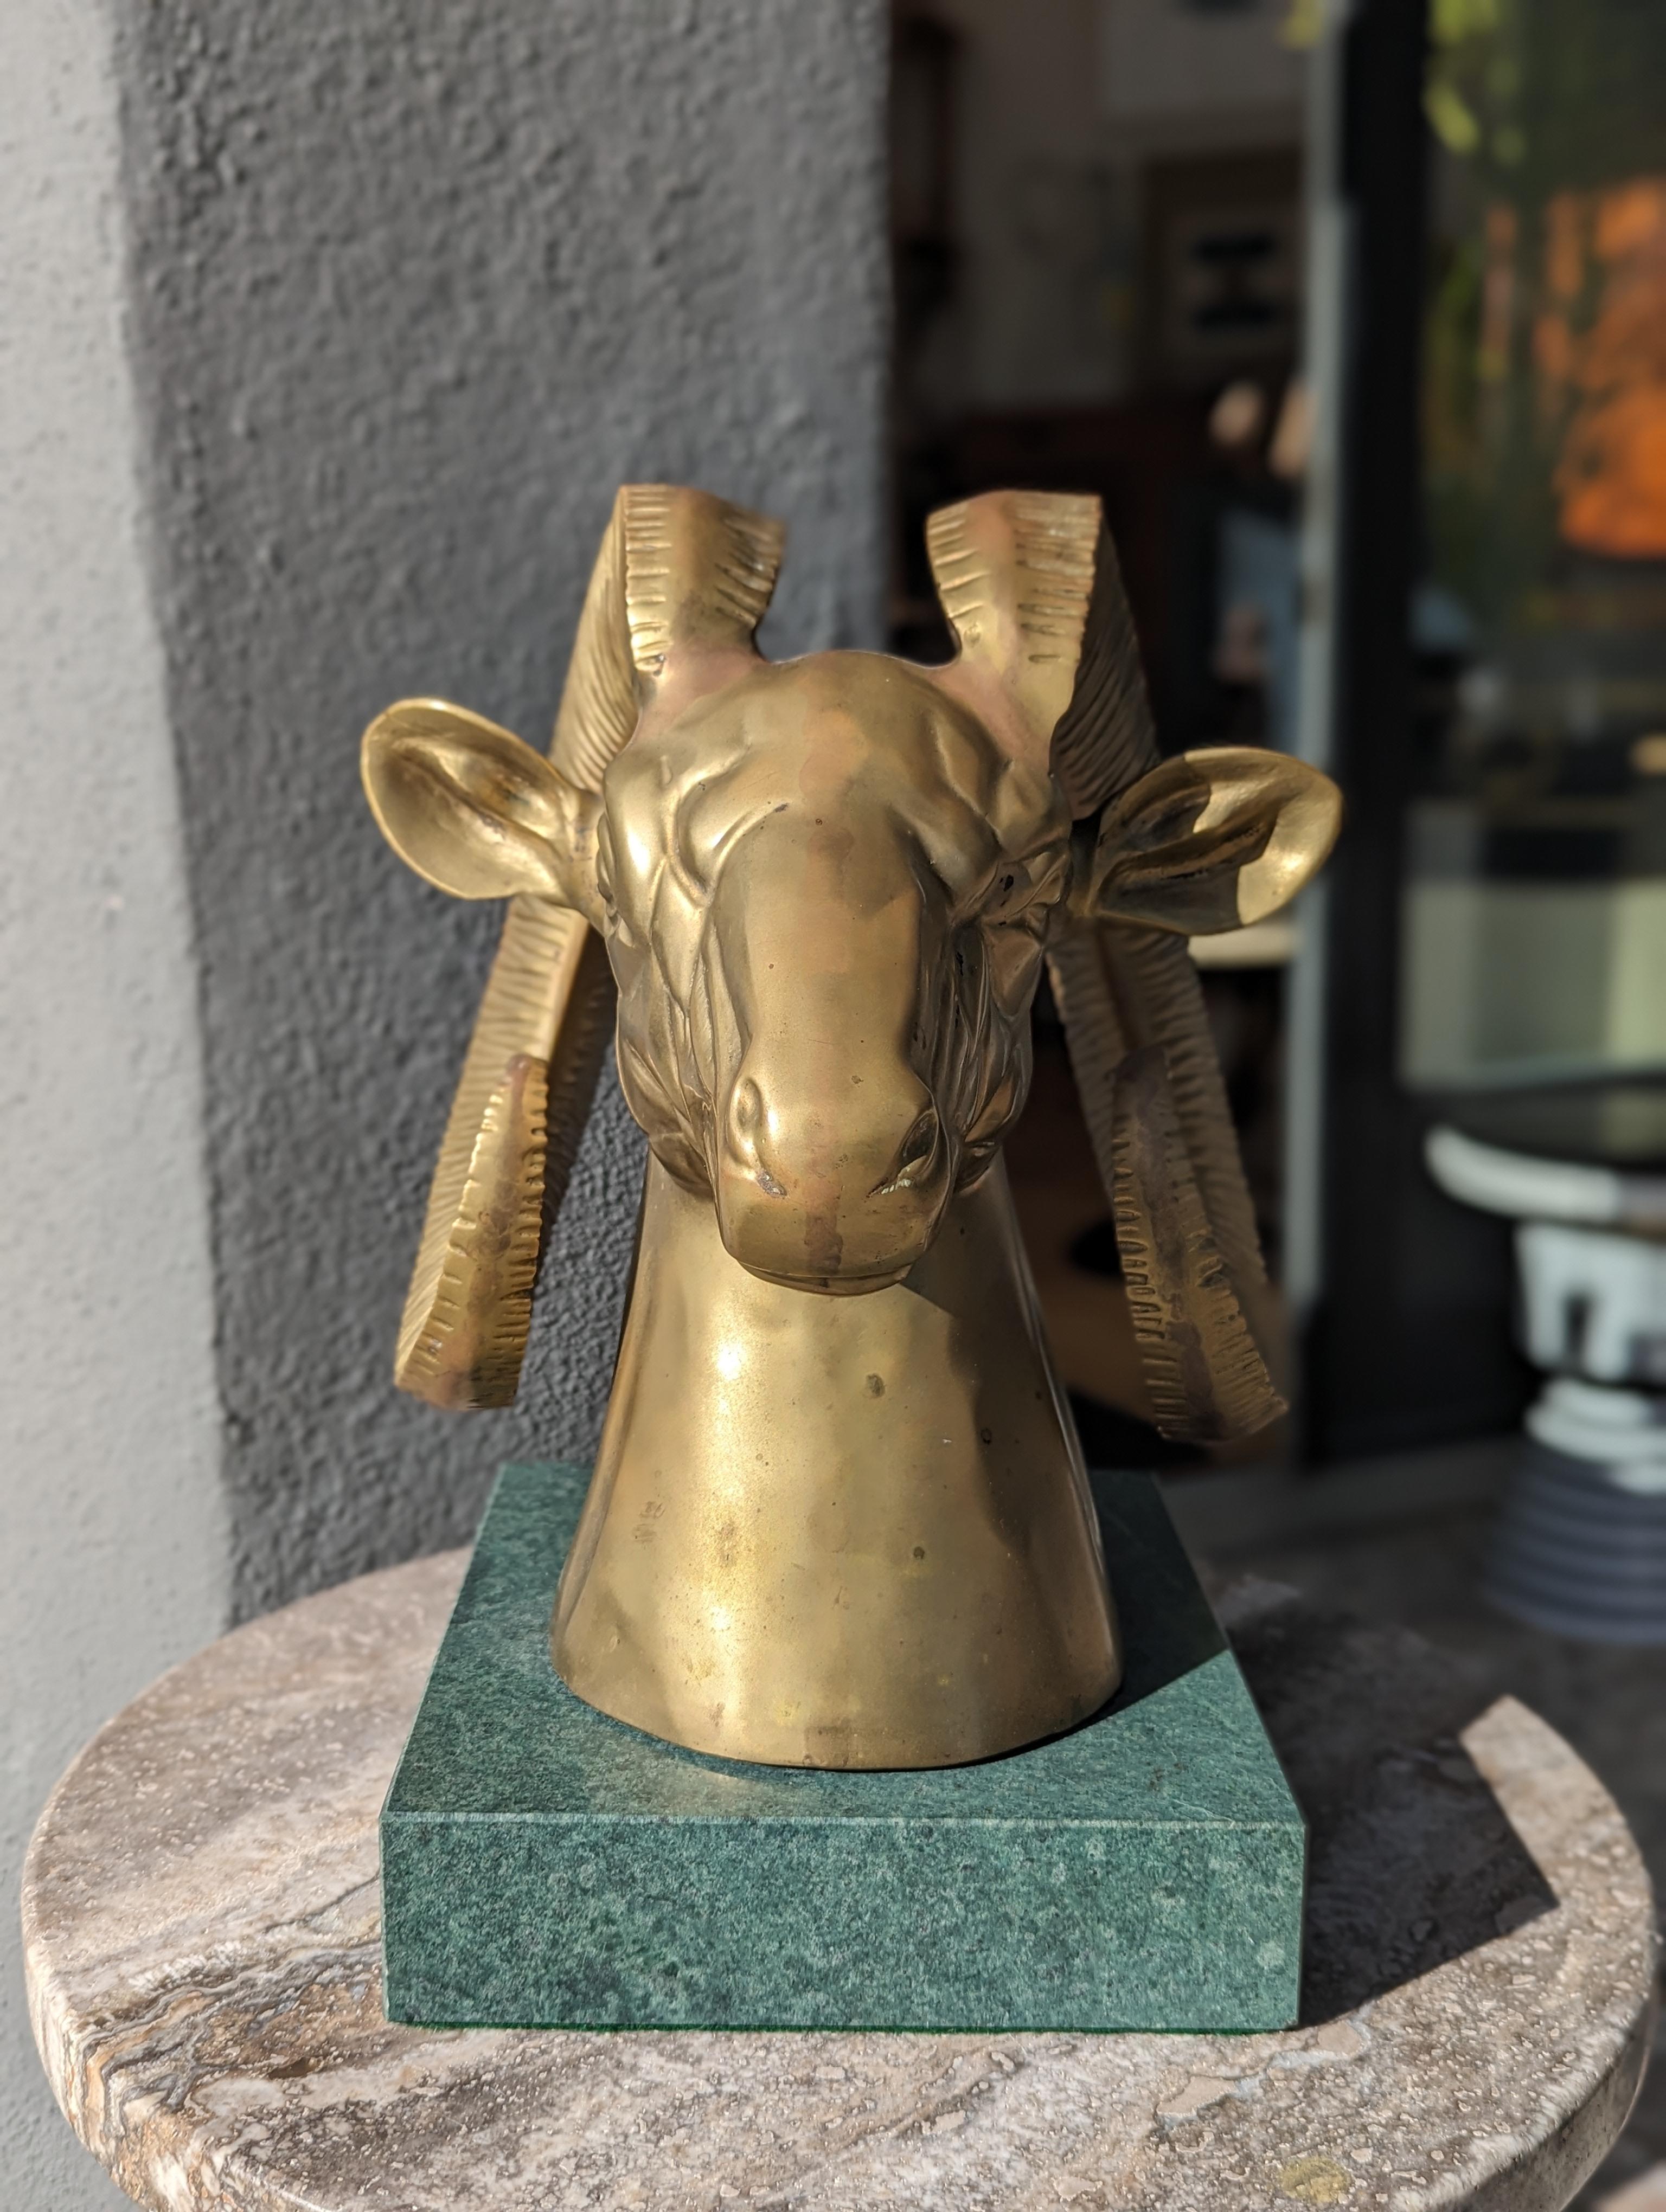 The Mid-Century Modern Brass Ram Sculpture, crafted from solid brass and perched on a polished green marble base, embodies the raw power and untamed spirit of the bighorn ram, infused with the sleek style of a bygone era. Imagine it in your living